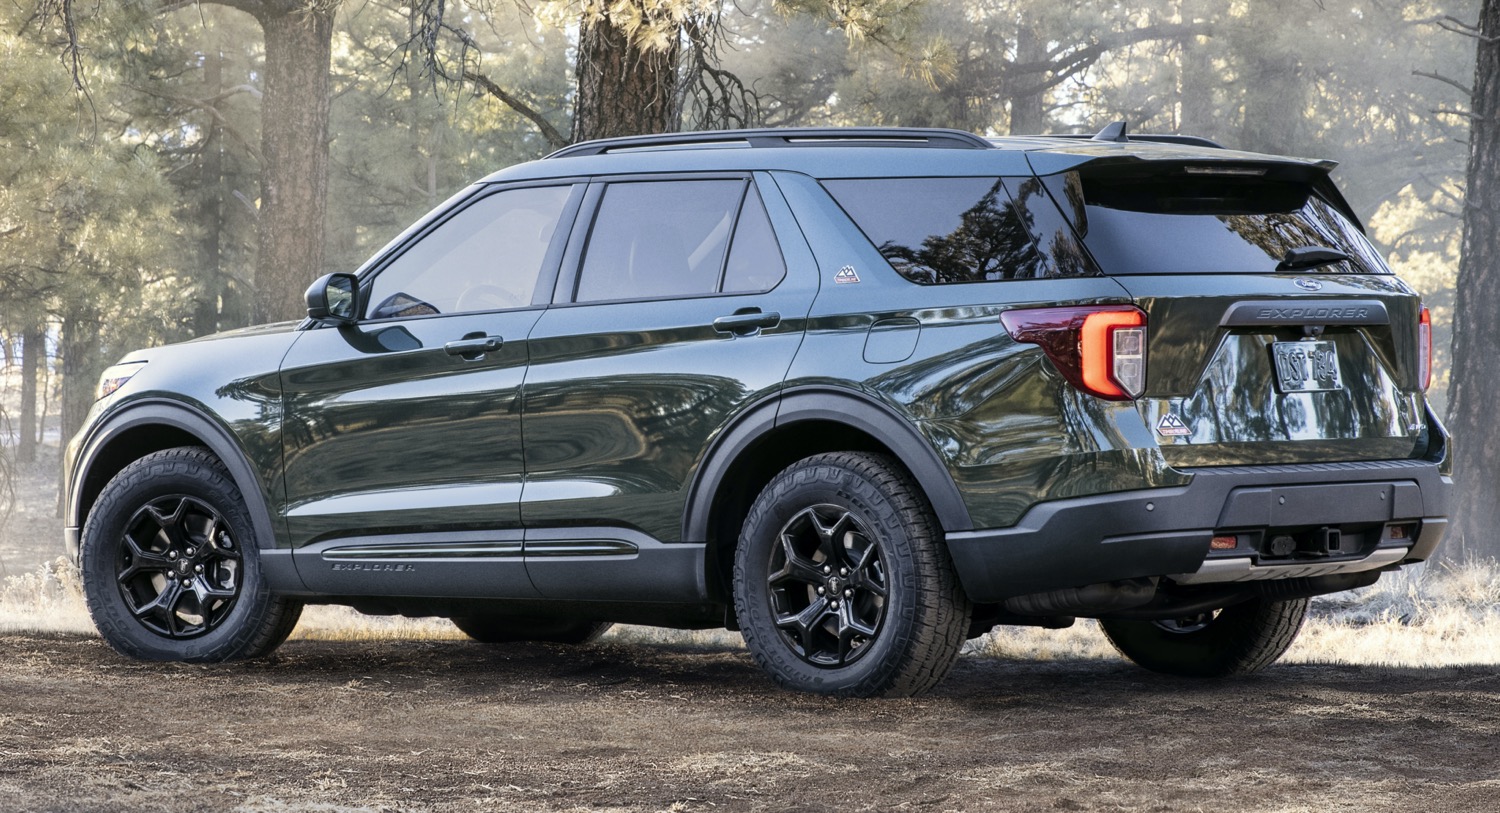 ford-explorer-incentive-offers-0-9-percent-apr-in-november-2022